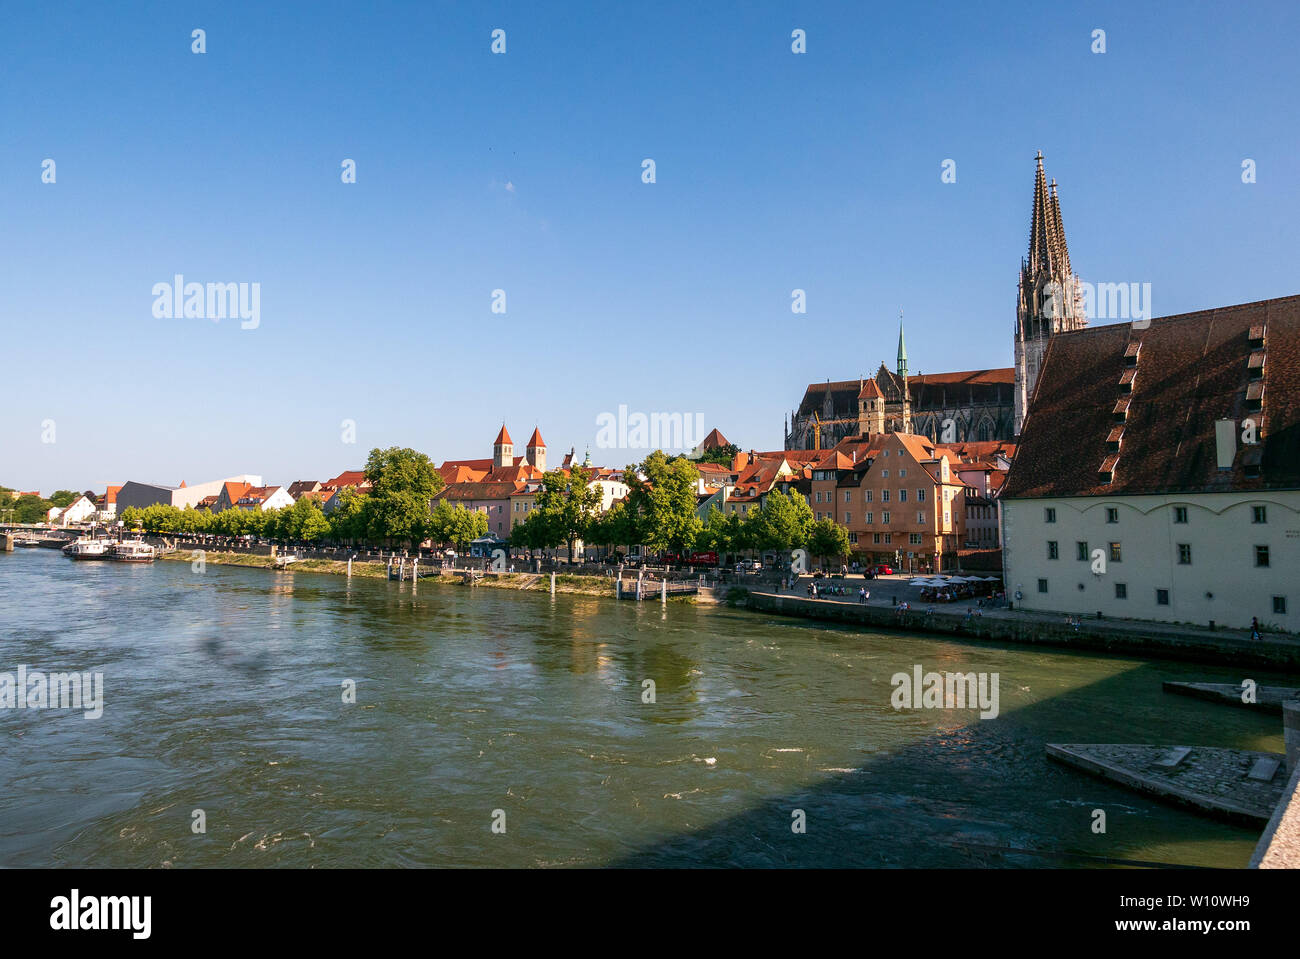 REGENSBURG, GERMANY - JUNE 13, 2019: Regensburg cityscape as viewed from the medieval Stone Bridge (Steinerne Brücke) over the Danube river. The medie Stock Photo